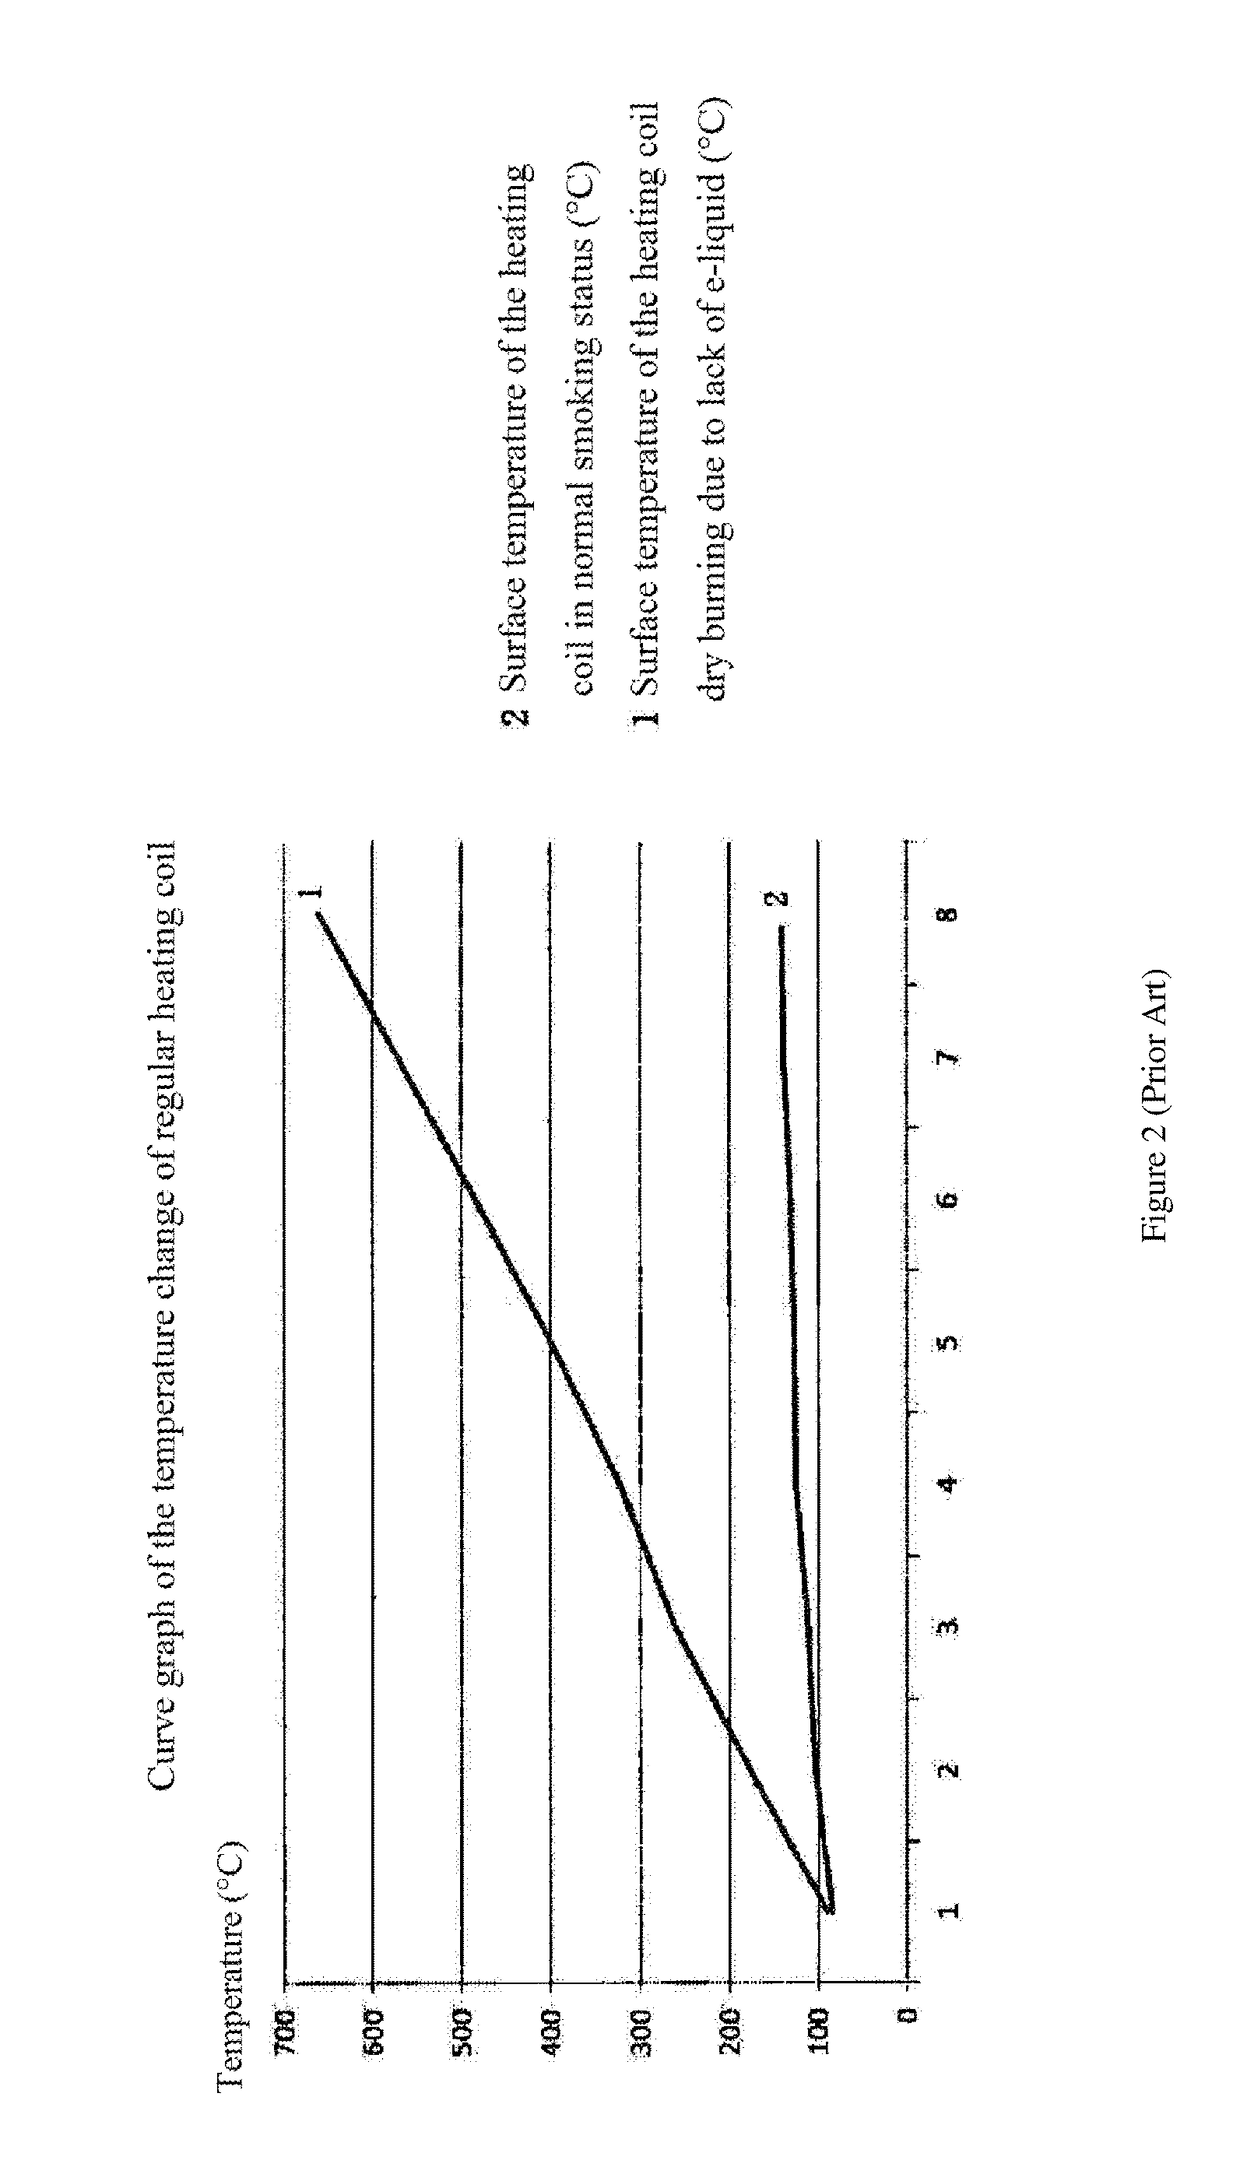 Electronic cigarette capable of temperature control and temperature control method therefor